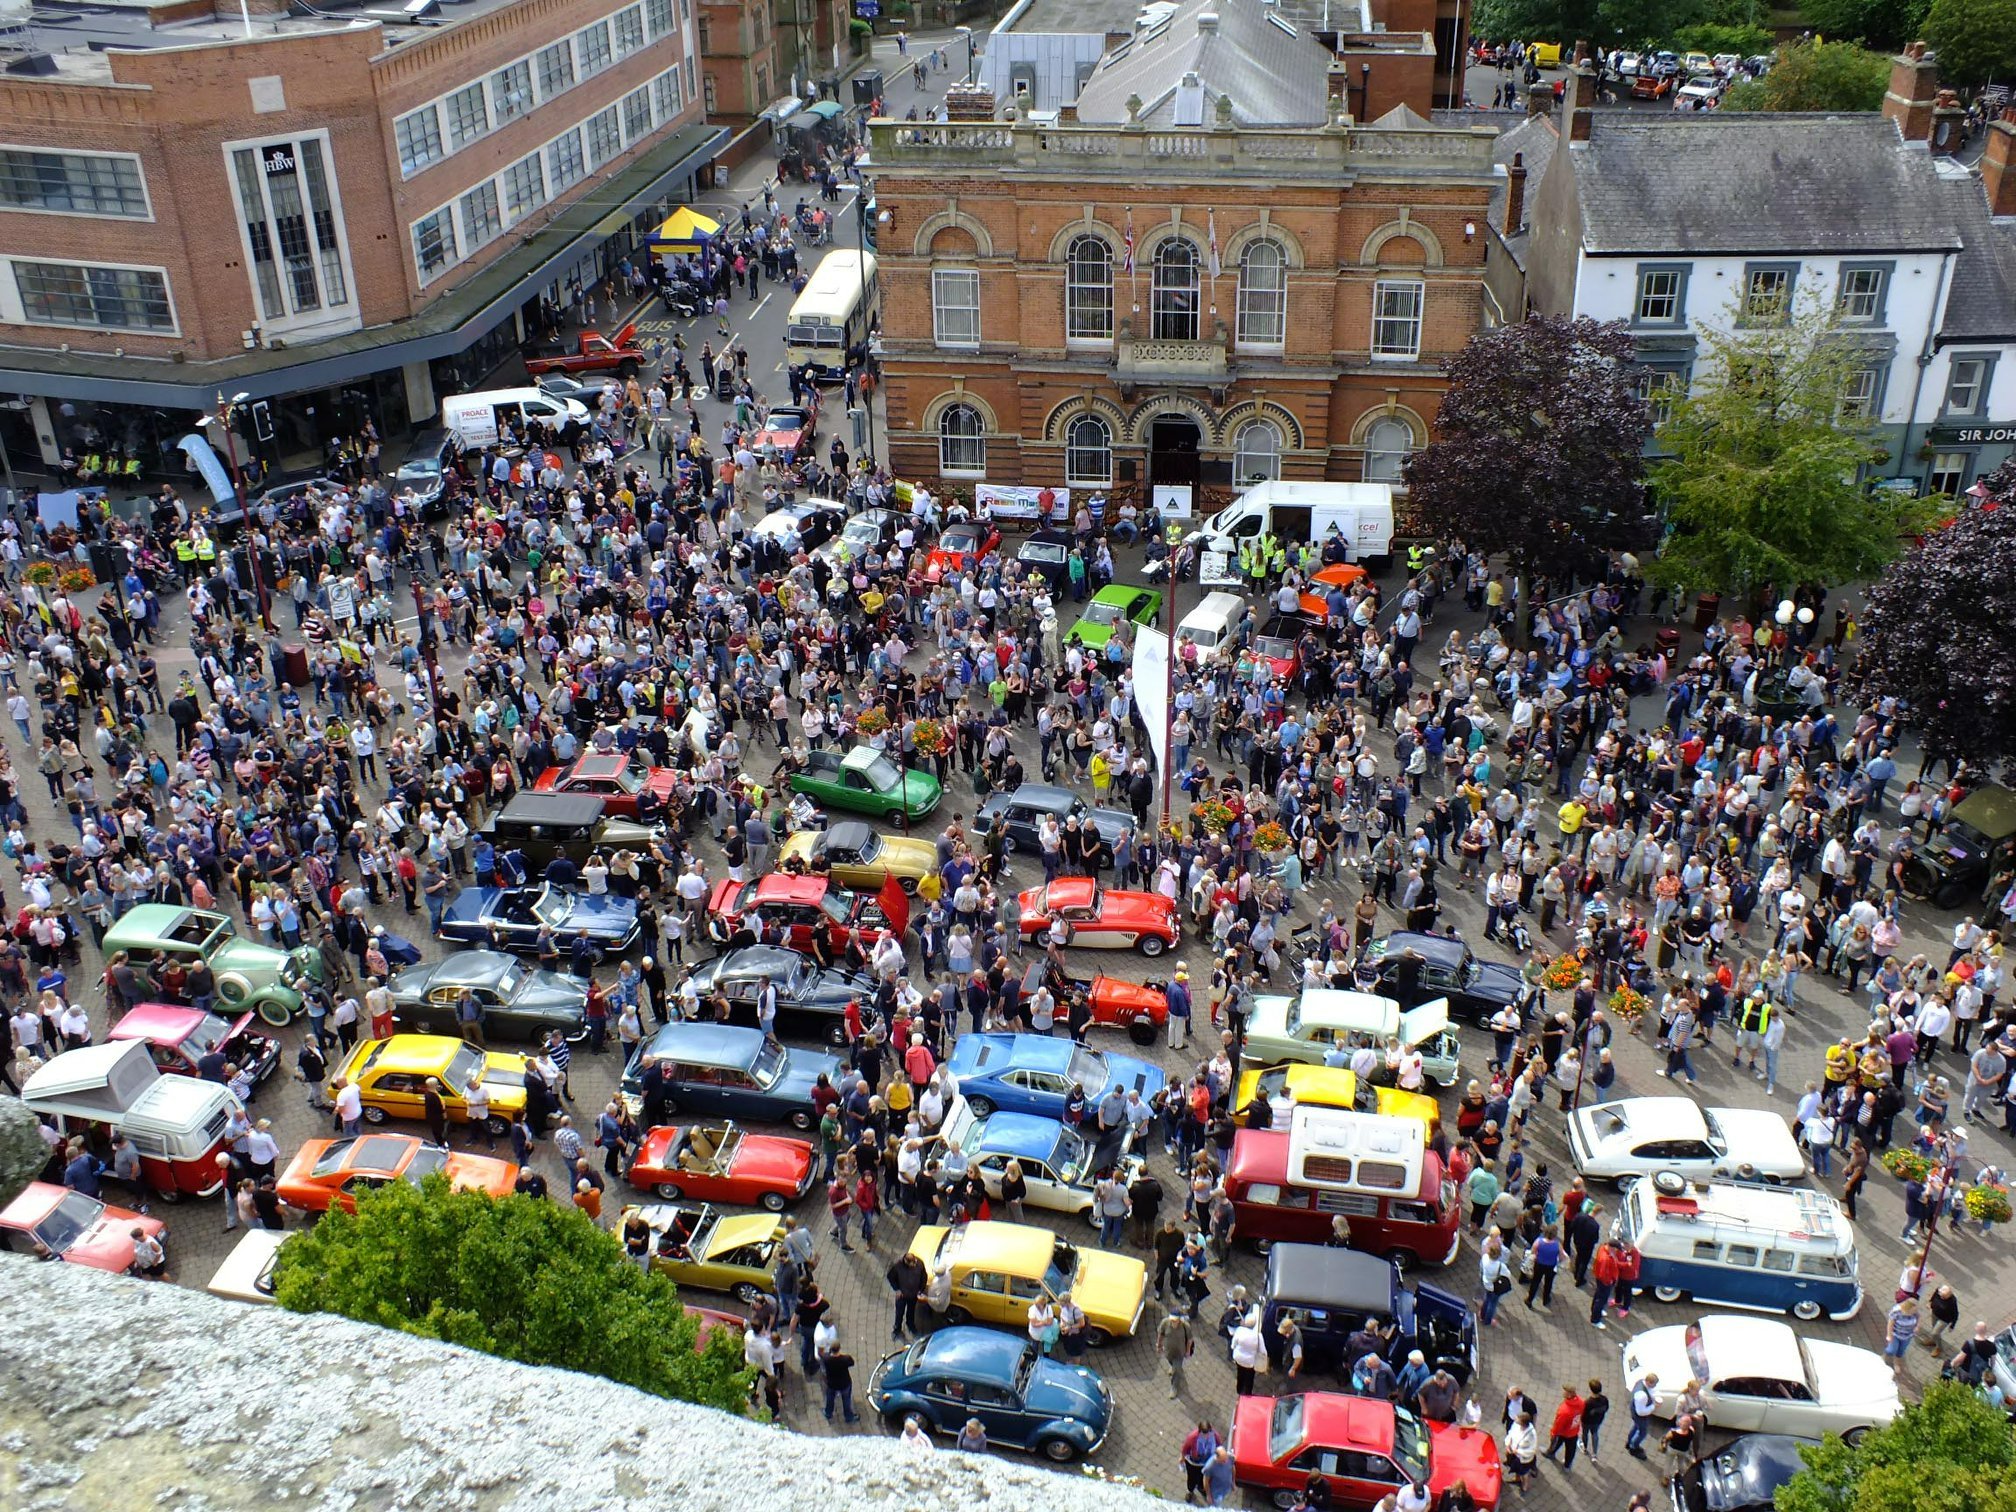 Only two days away – Ilkeston Heritage and Classic Vehicle Show….